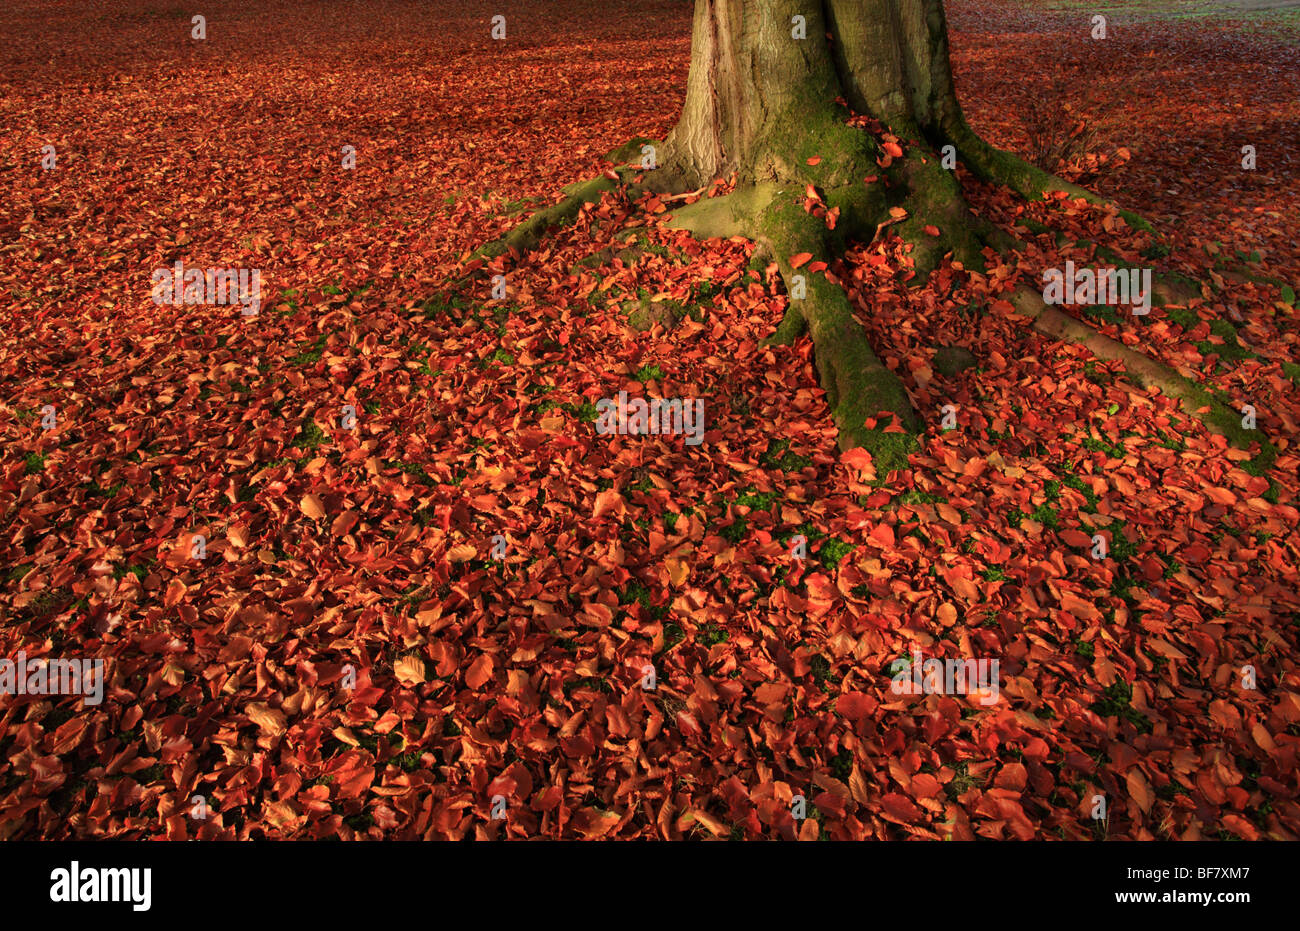 The trunk of a beech tree in Autumn with a carpet of red leaves. Stock Photo